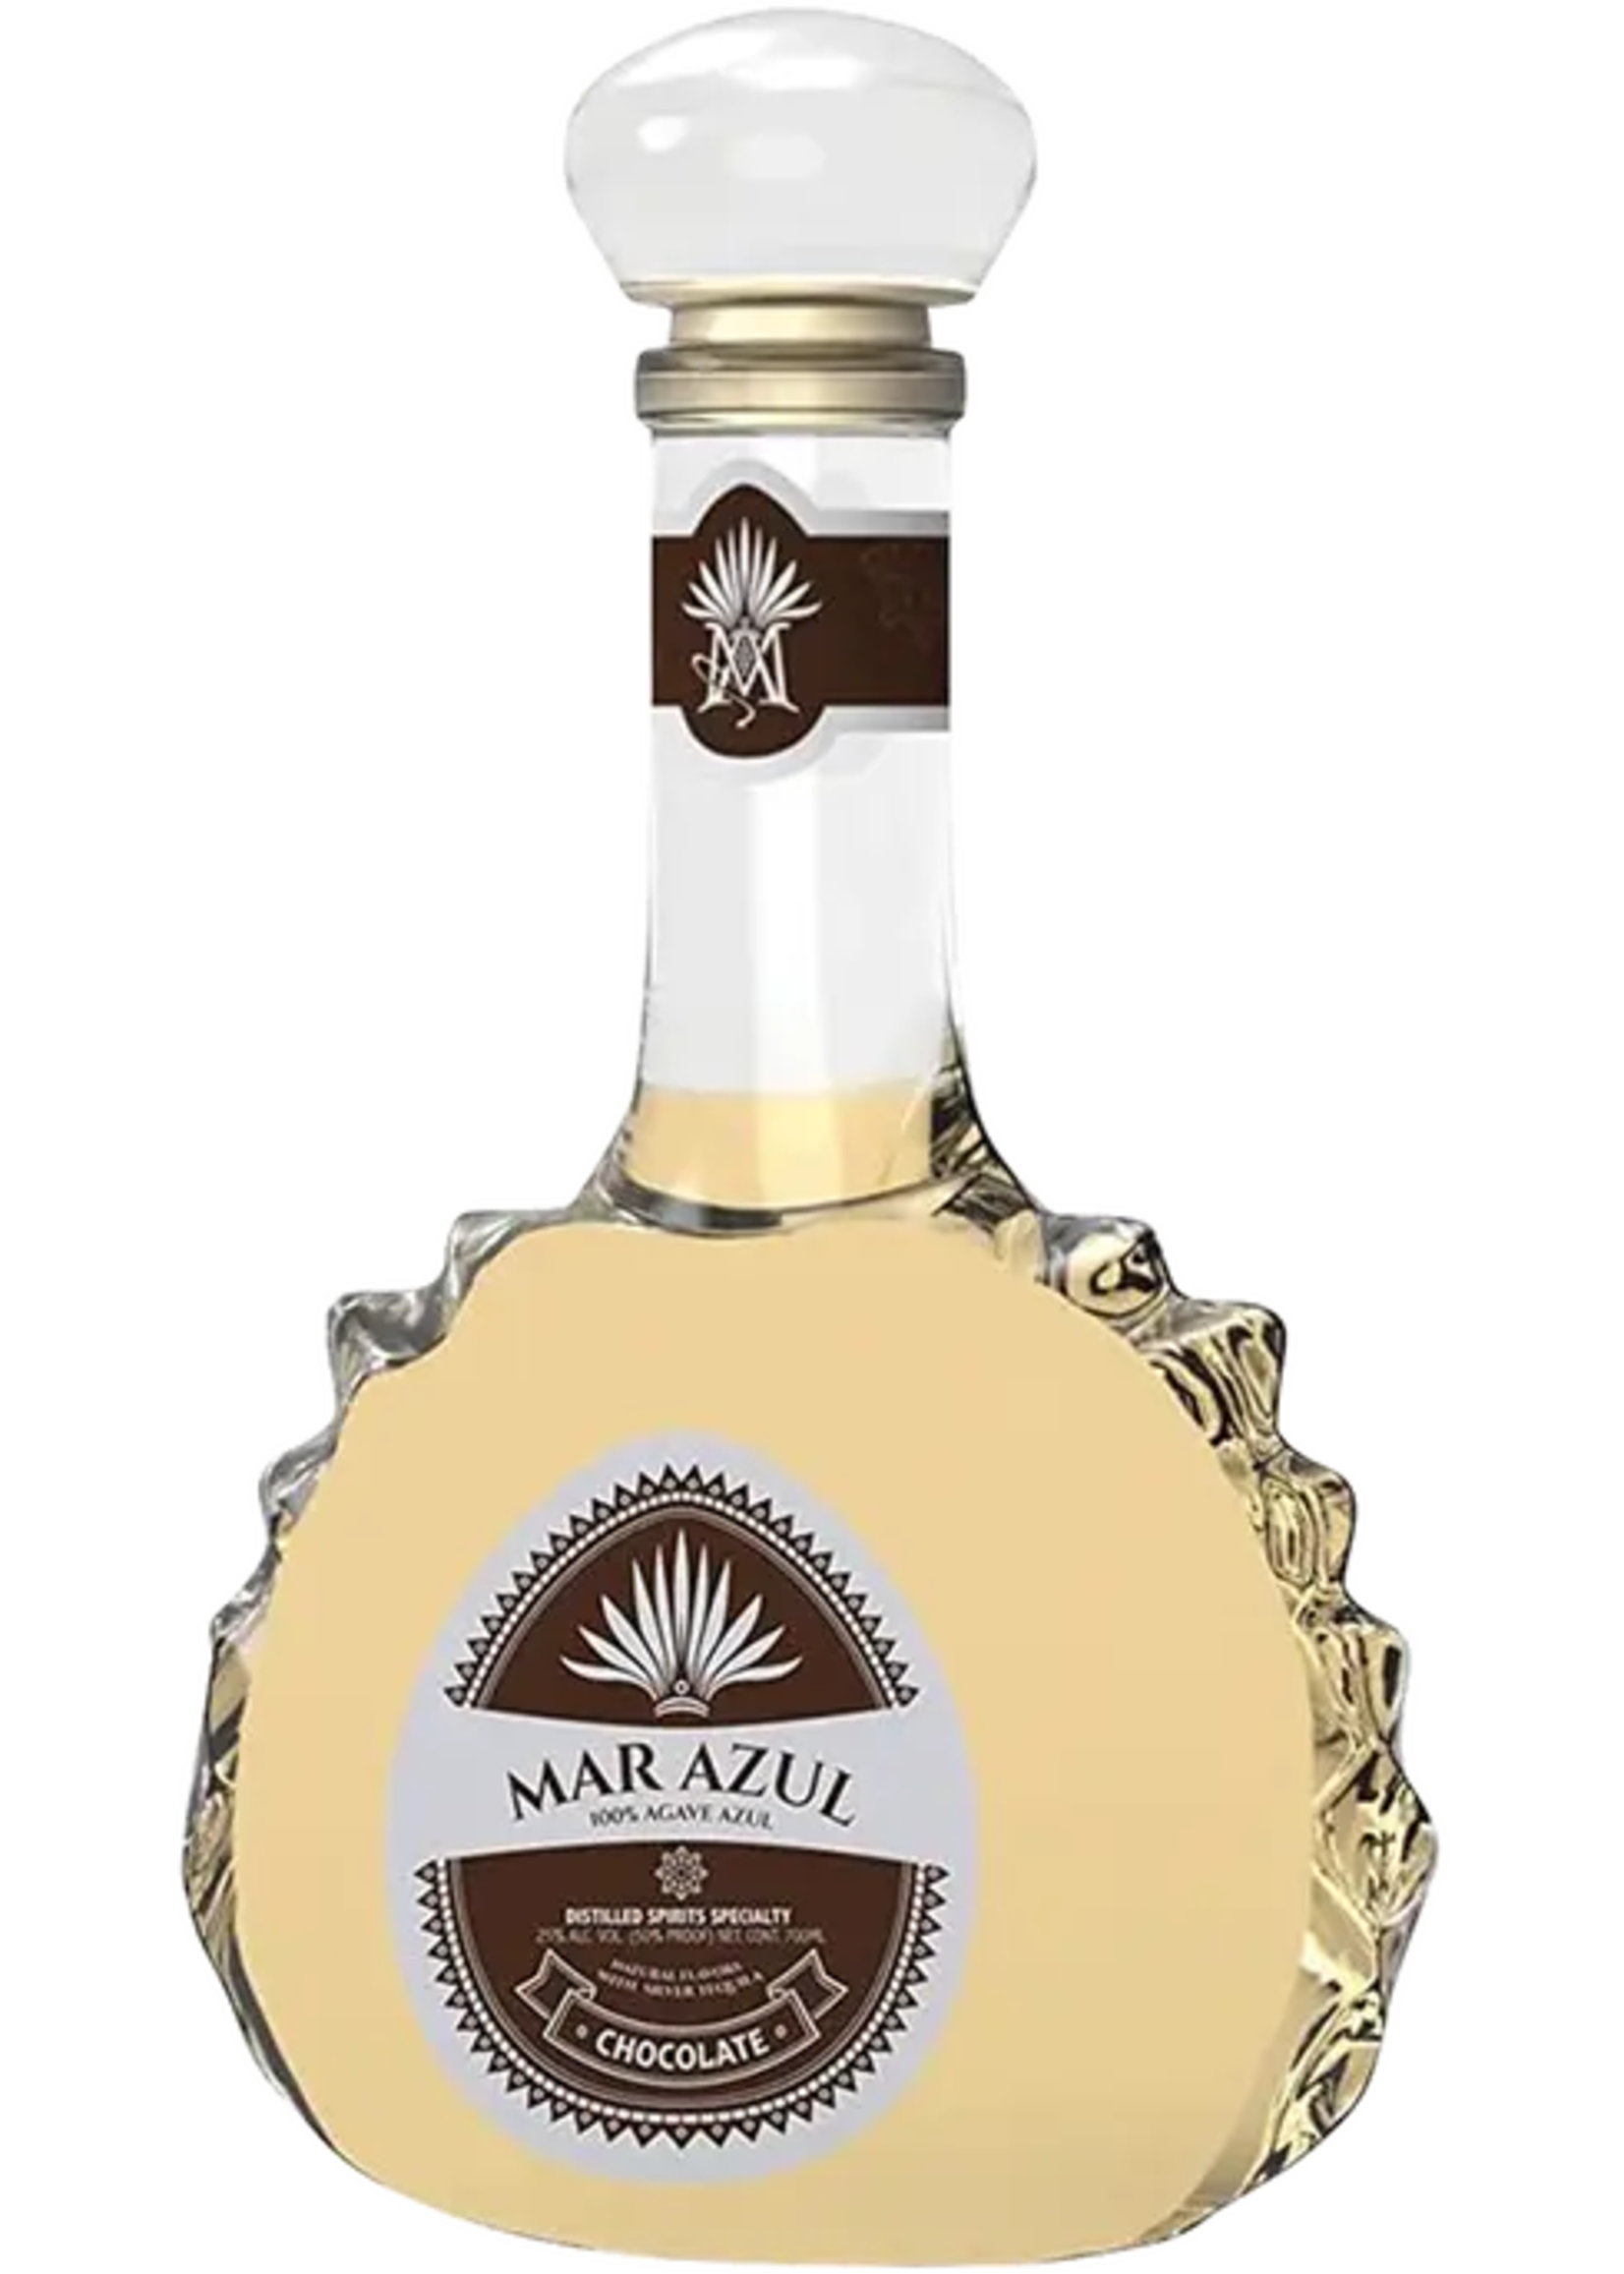 Mar Azul Chocolate Flavored Tequila 50Proof 750ml